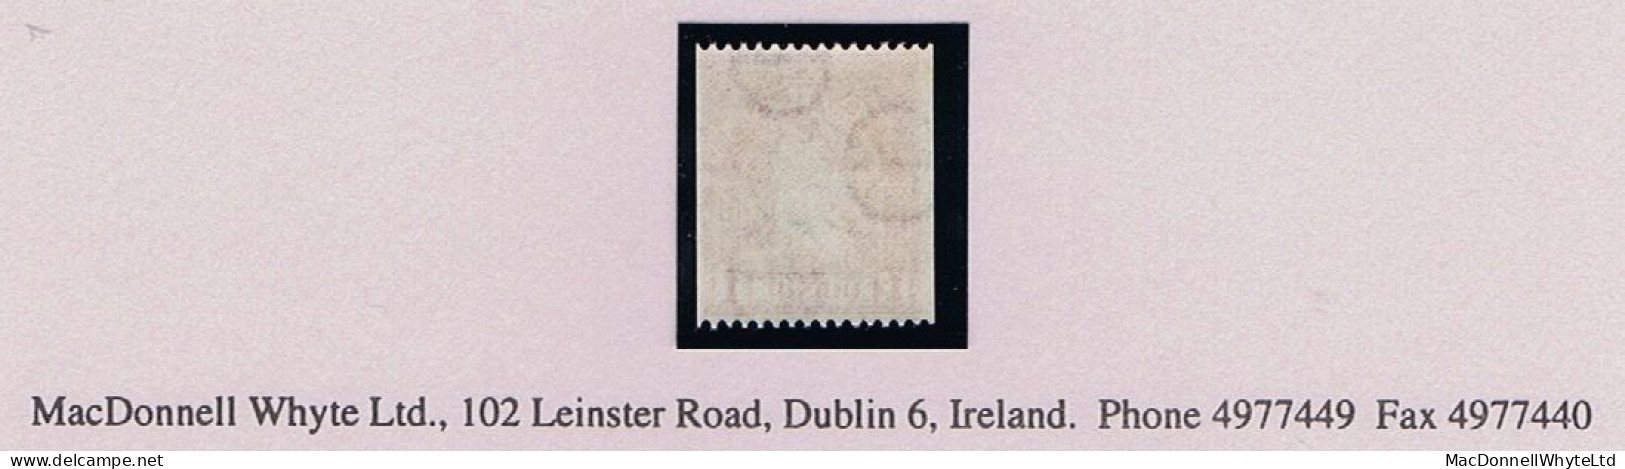 Ireland 1946 Coil 1d Perf 15 X Imperf, Watermark Inverted, Single Very Fresh Mint Unmounted Never Hinged - Ungebraucht